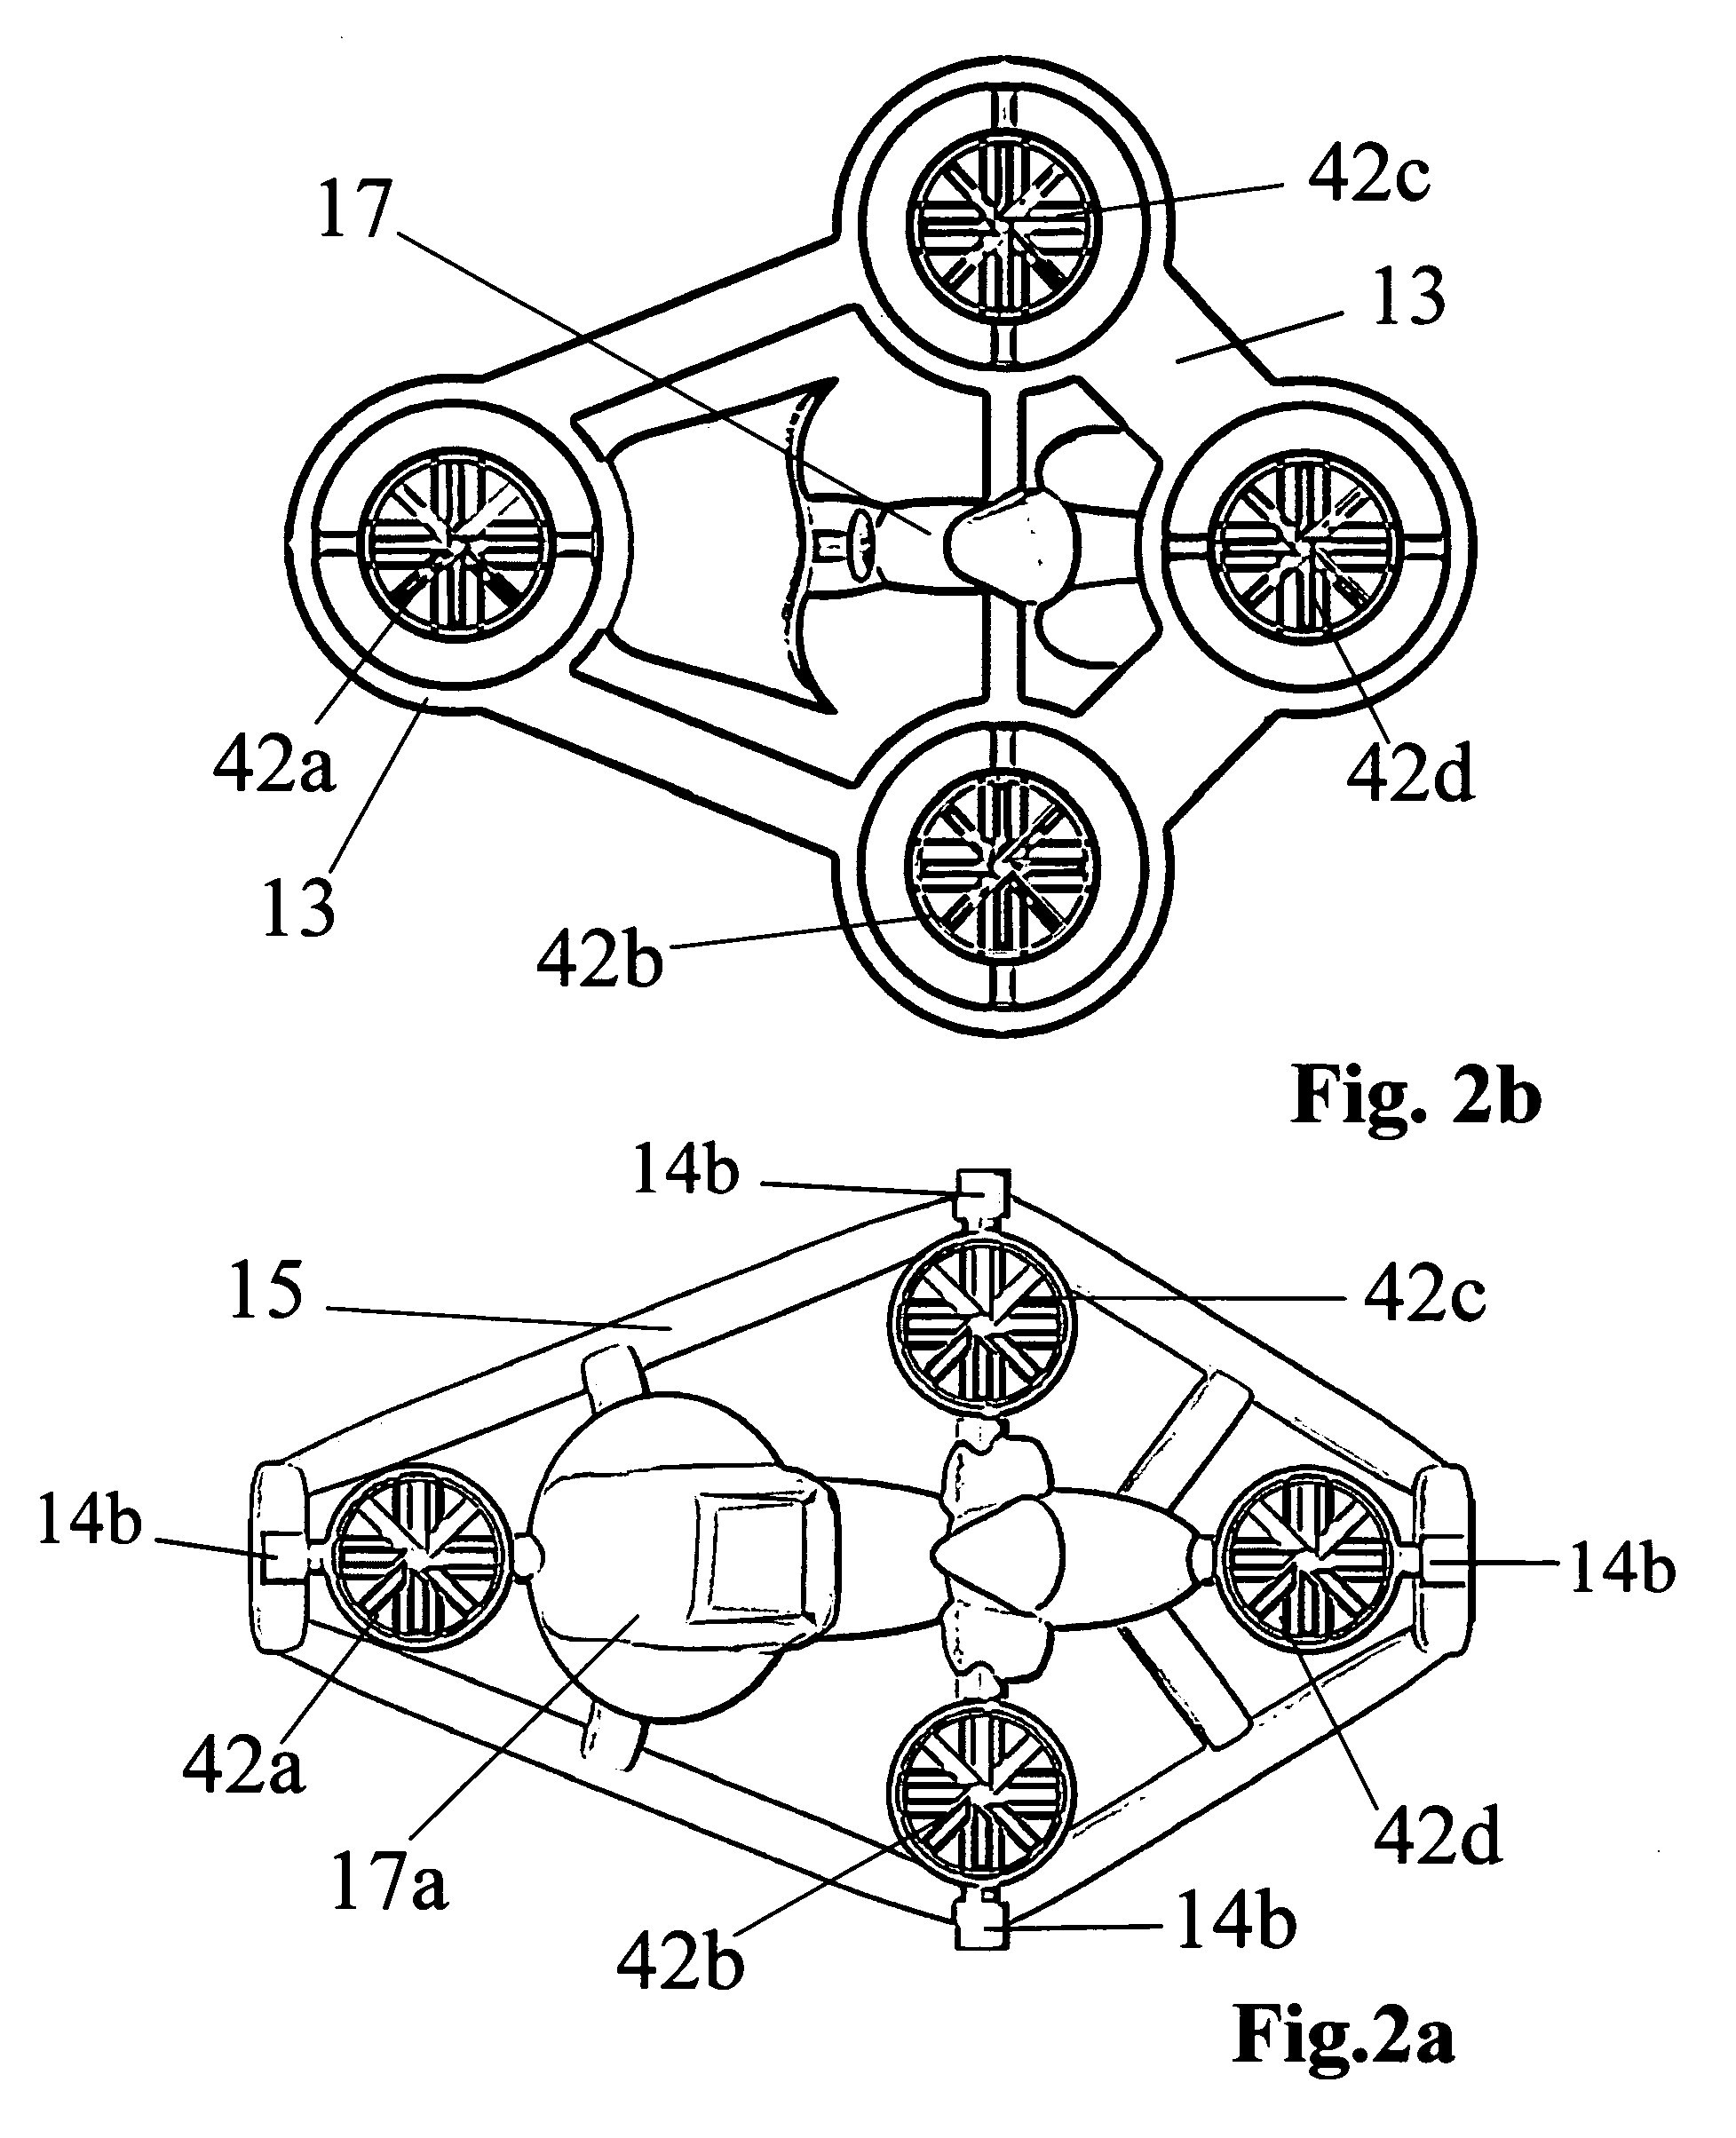 Ducted fan vertical take-off and landing vehicle